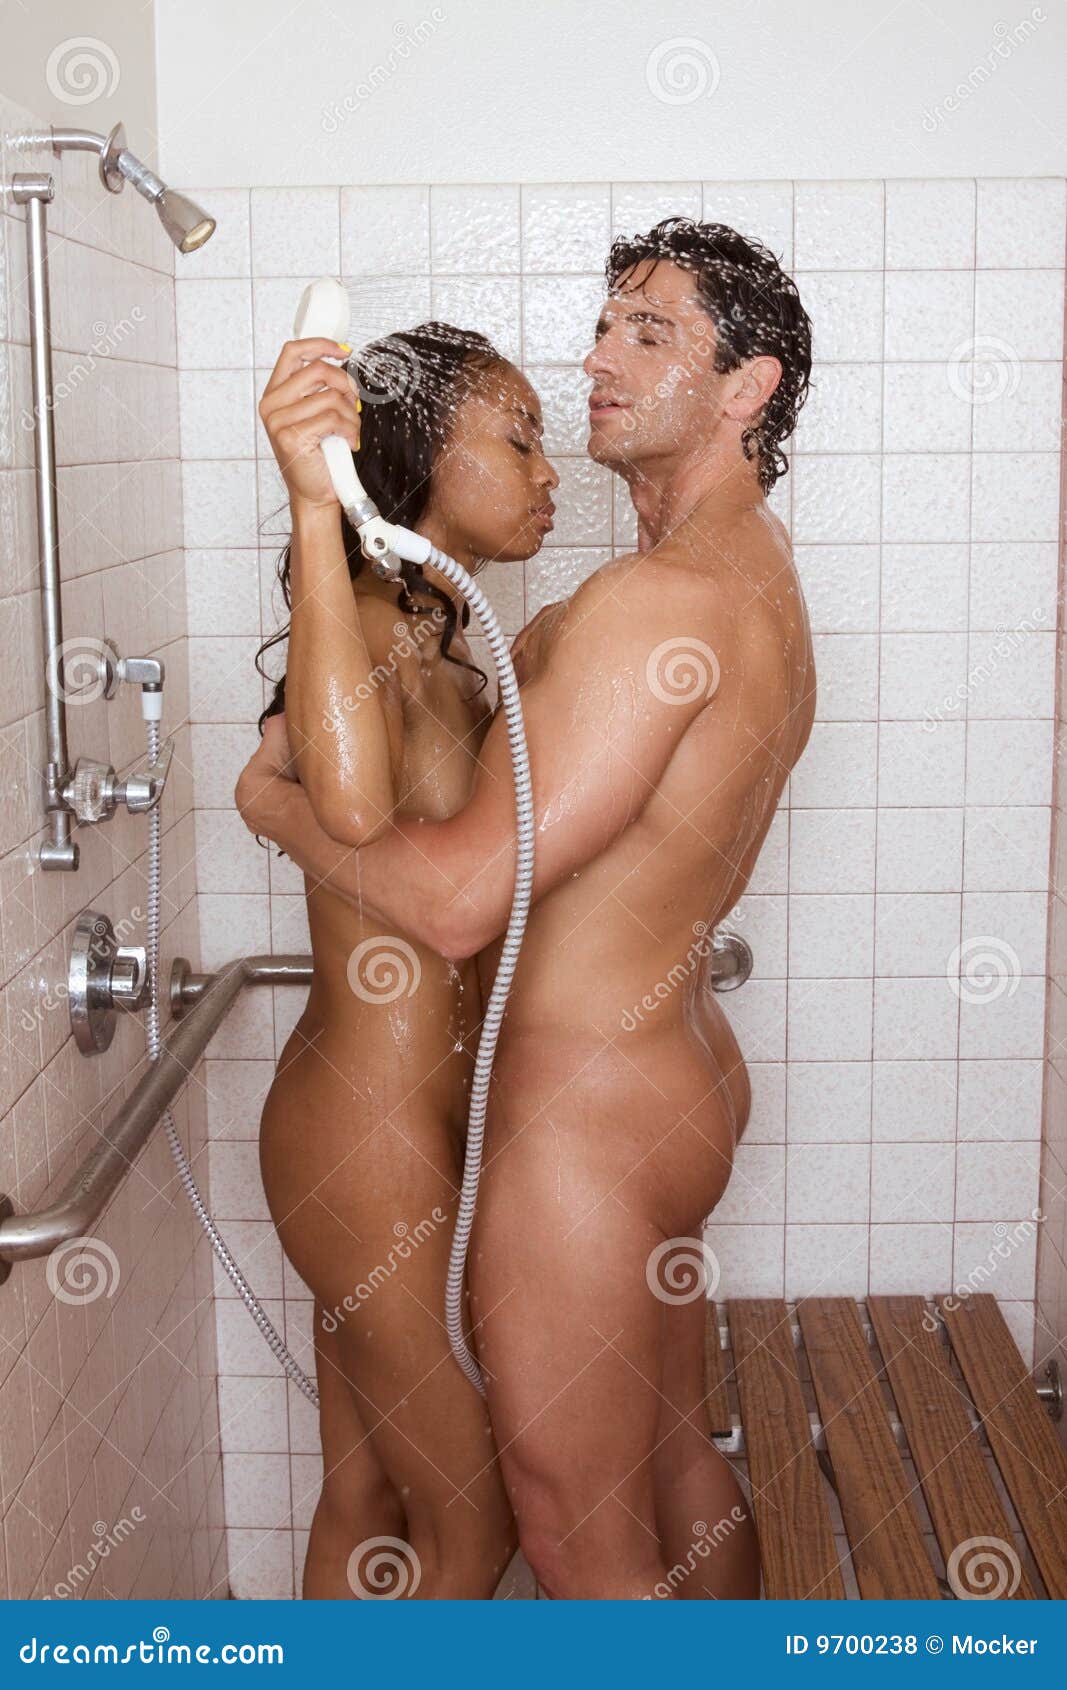 Pictures Of Sexy Black Naked Women In The Shower Homemade